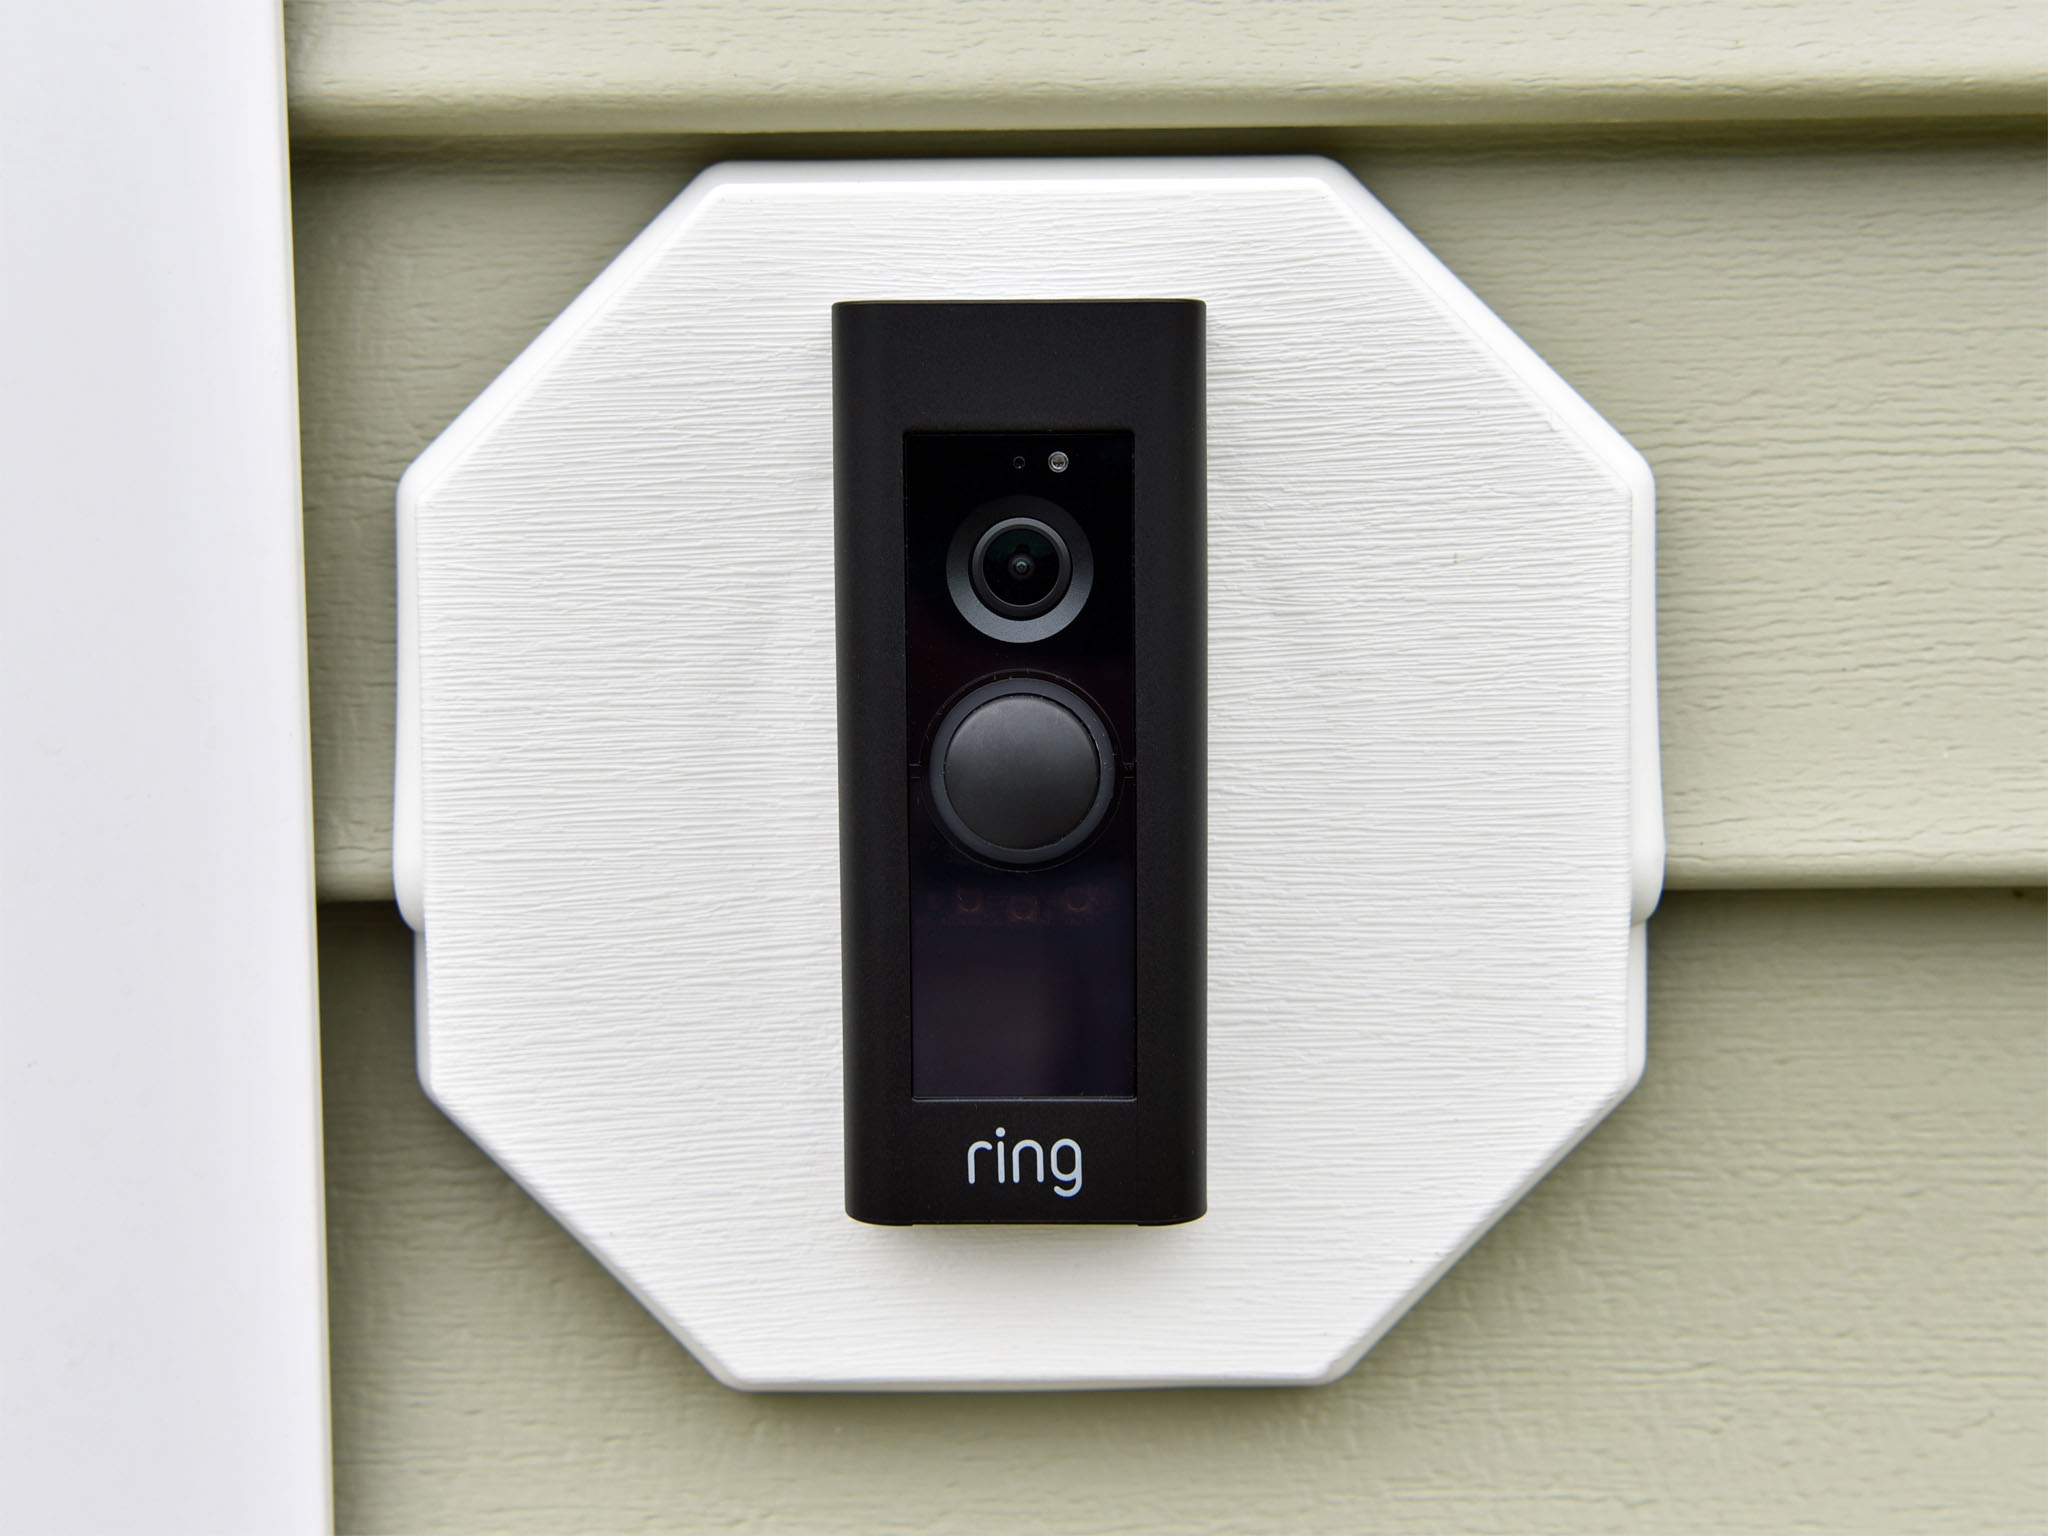 How To Mount A Ring Doorbell On Vinyl Siding